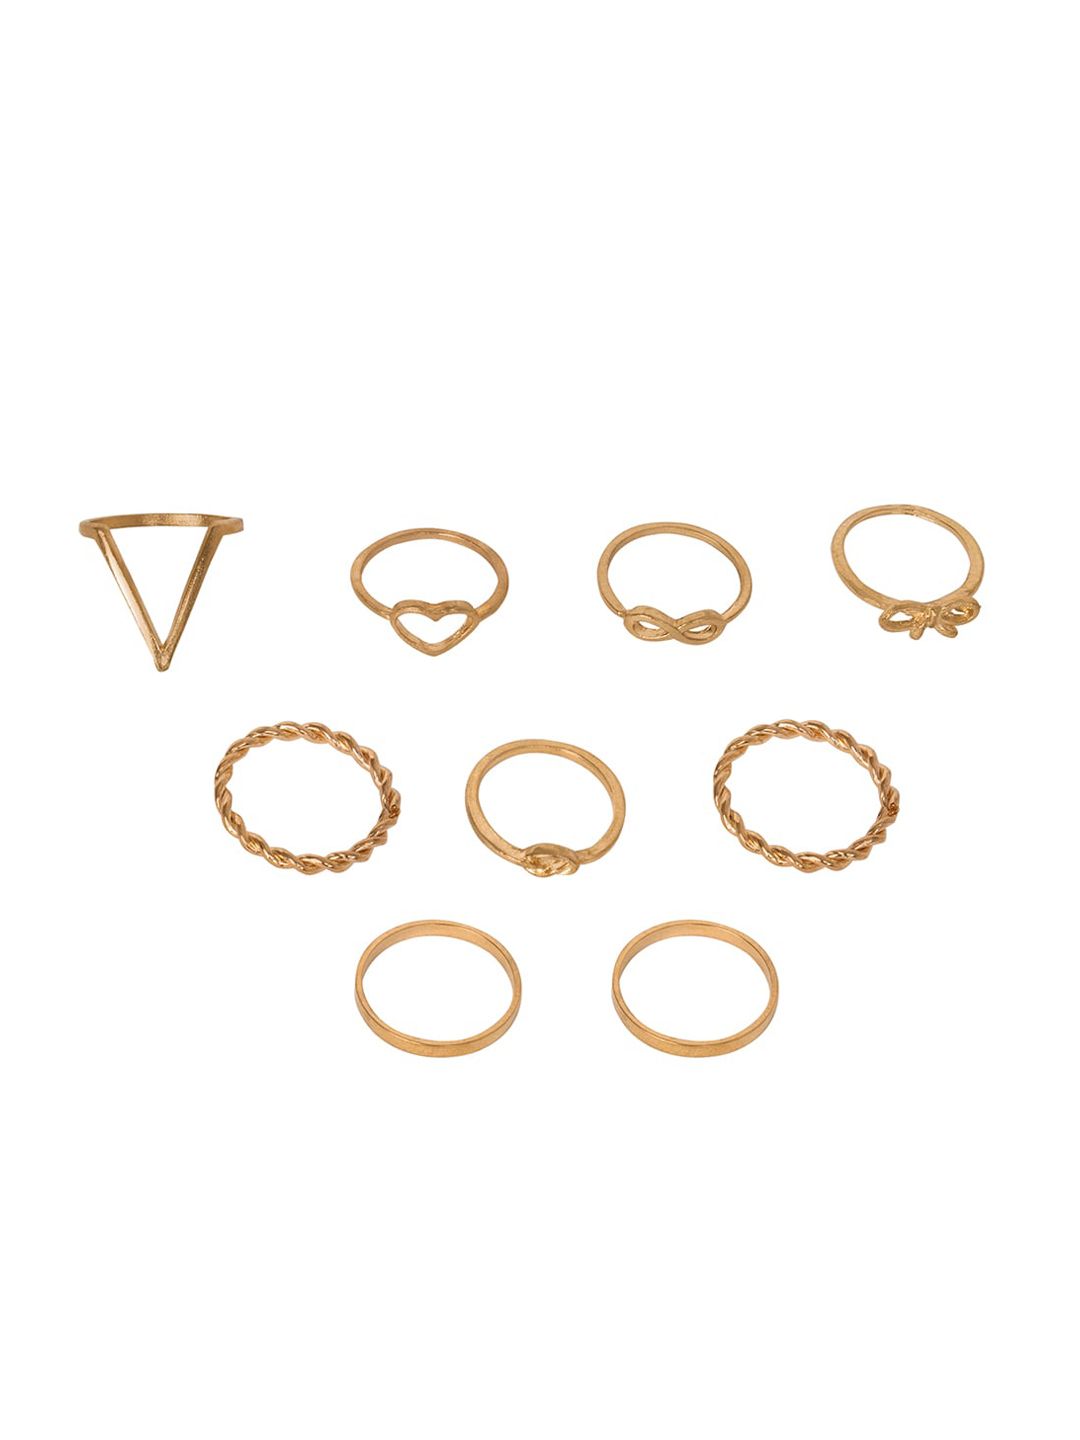 FabAlley Set Of 9 Gold-Plated Gold-Toned Finger Rings Price in India